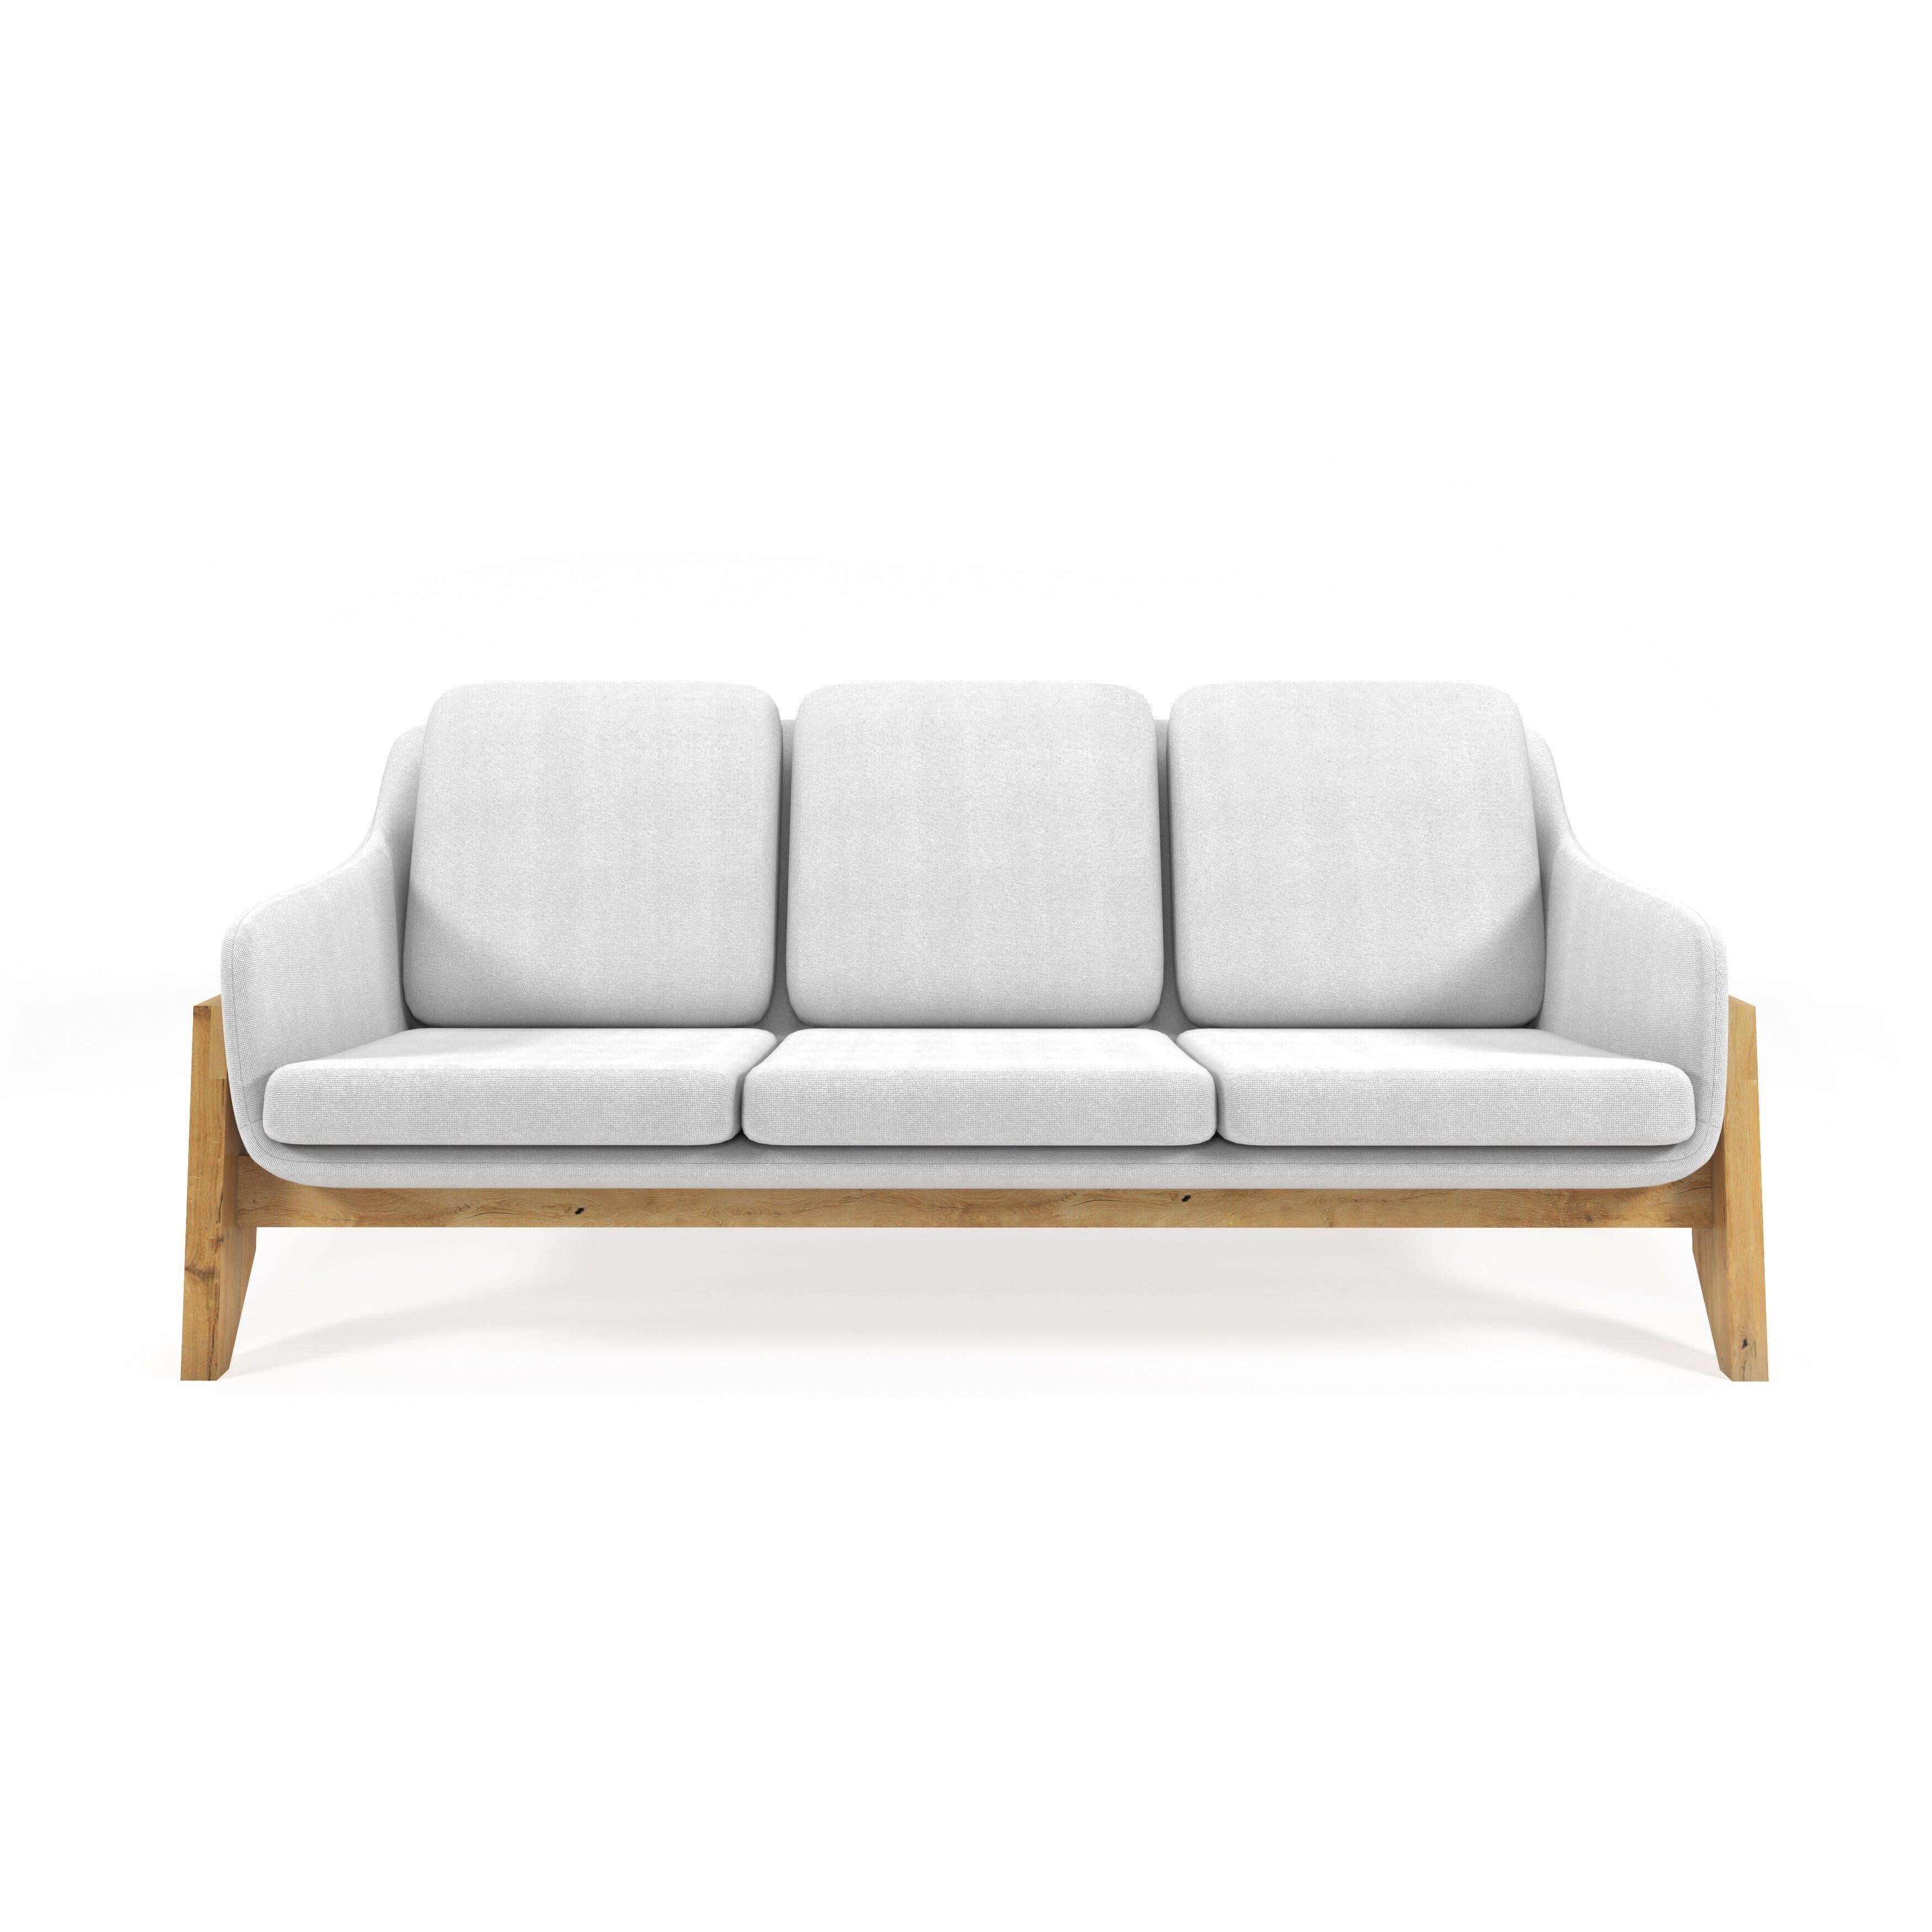 Bring together the beauty of your indoor or outdoor living space with the Nava-Sofa! With its striking wood joinery and design, this versatile piece captivates and enhances any area you place it in. Get yours & craft your perfect atmosphere.

All